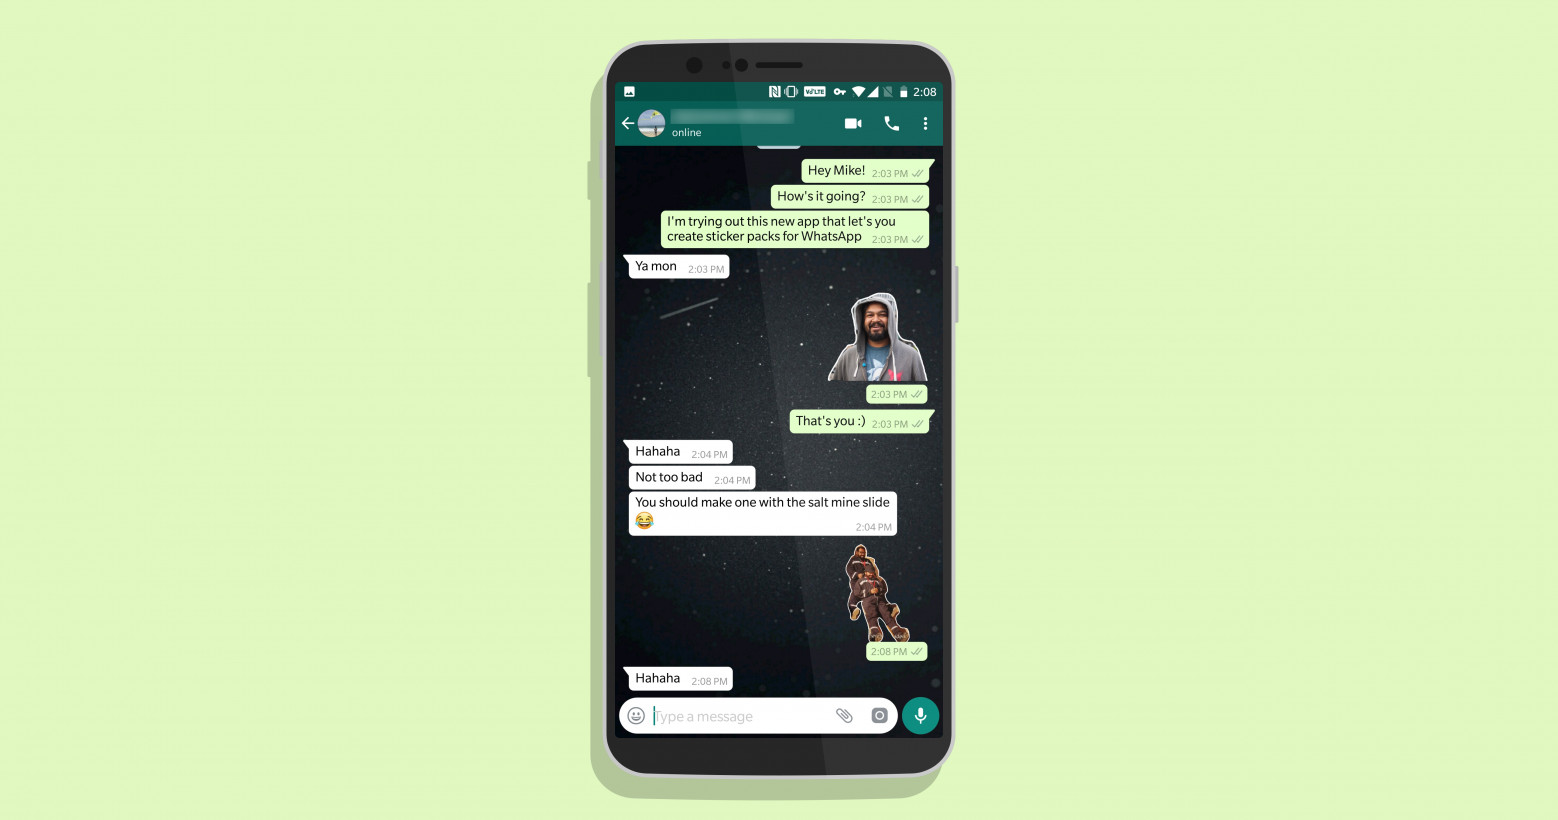 Turn into a WhatsApp sticker with this free Android app